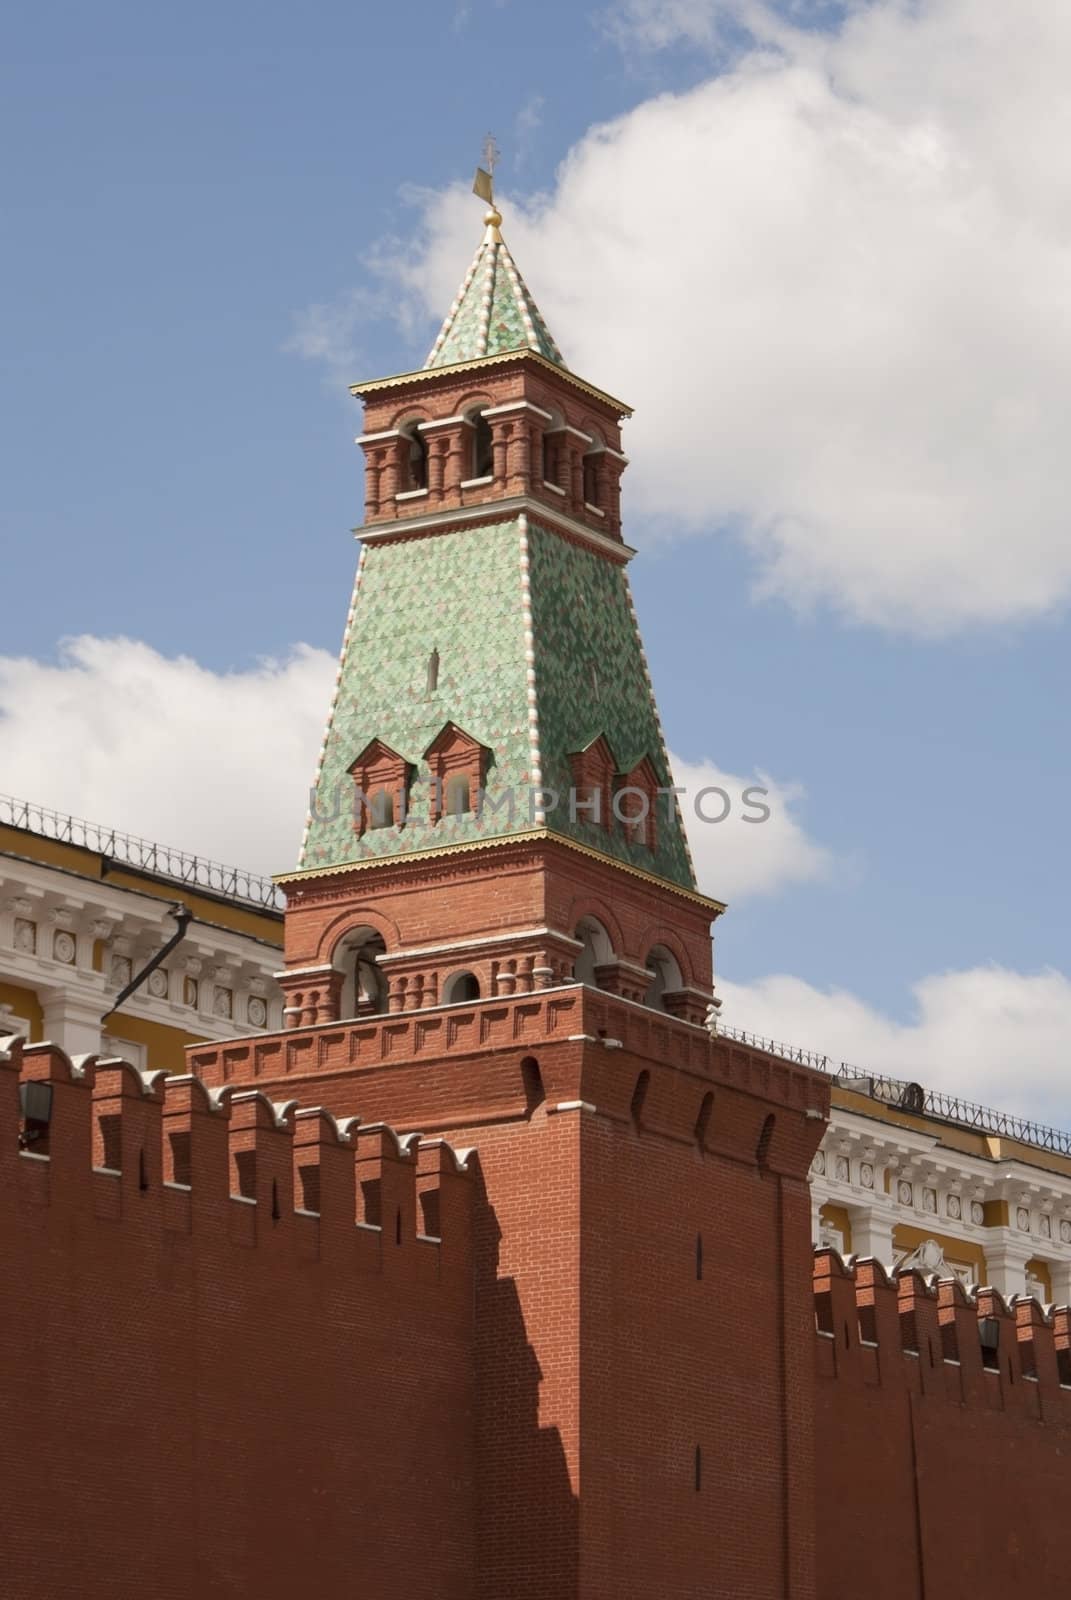 Senatskaya tower at Red Square in Moscow, Russia